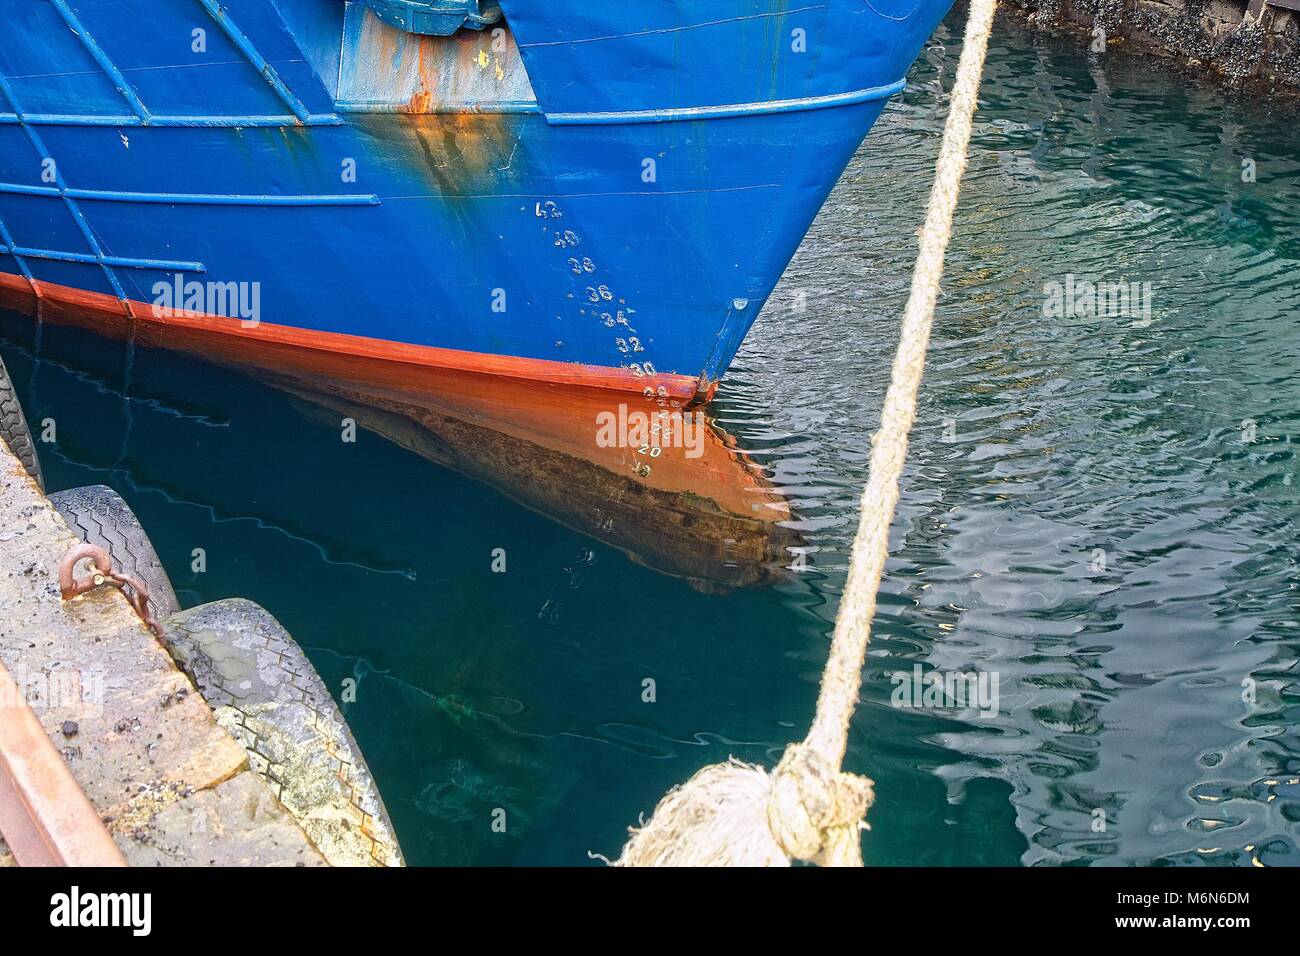 Ship in the harbor. Water. Red bow nose. Blue hull. Anchor. Draft scale numbers Stock Photo